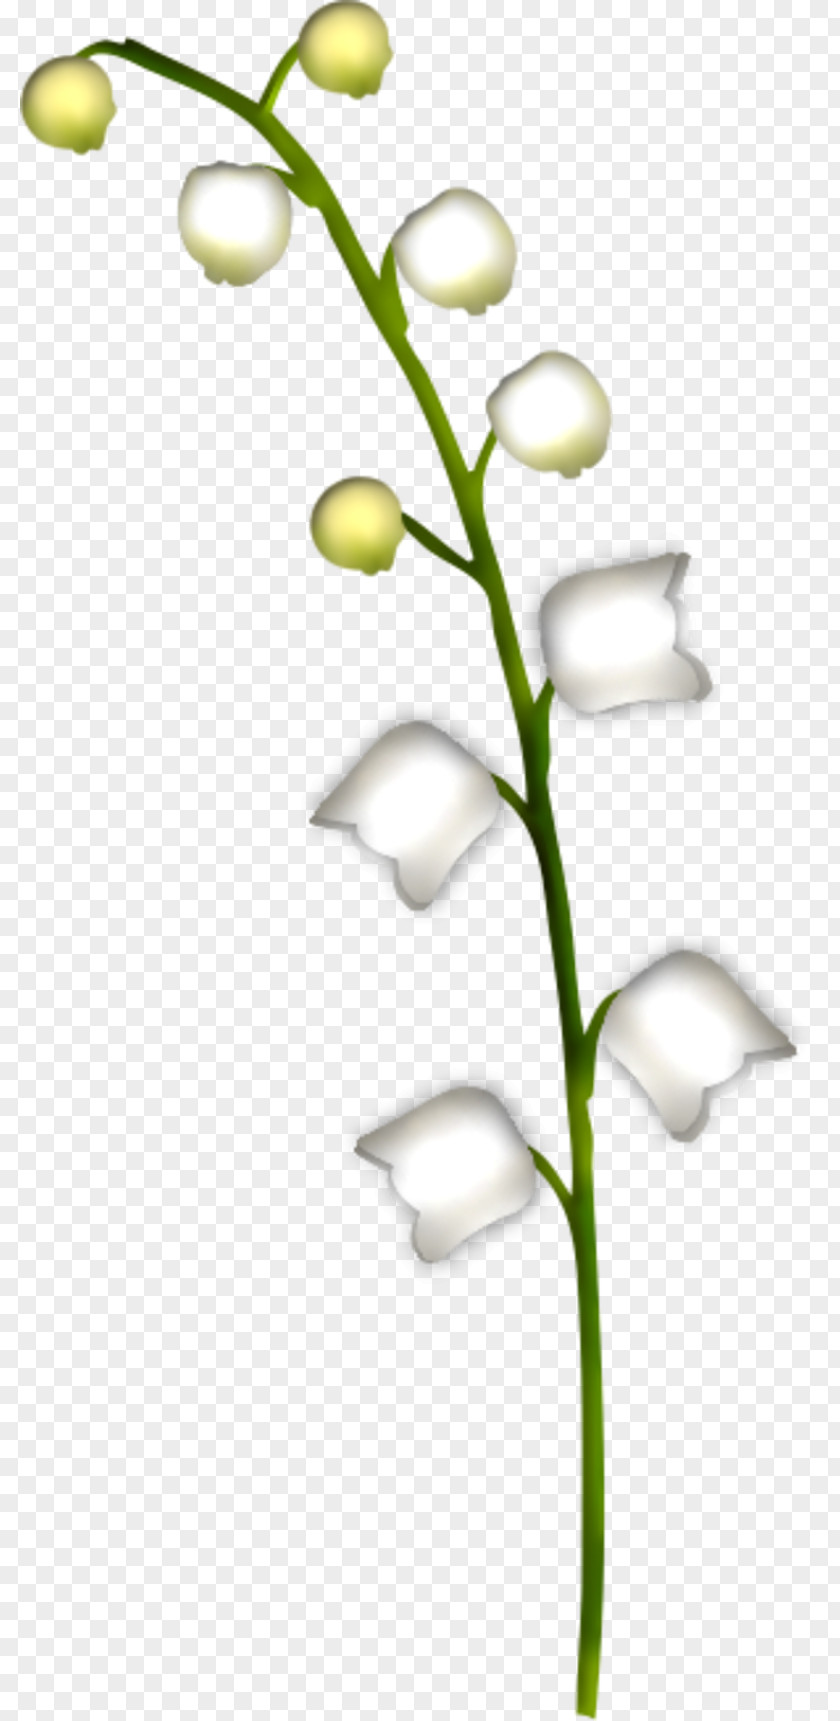 8 Lily Of The Valley Cut Flowers Plante Toxique Raceme PNG